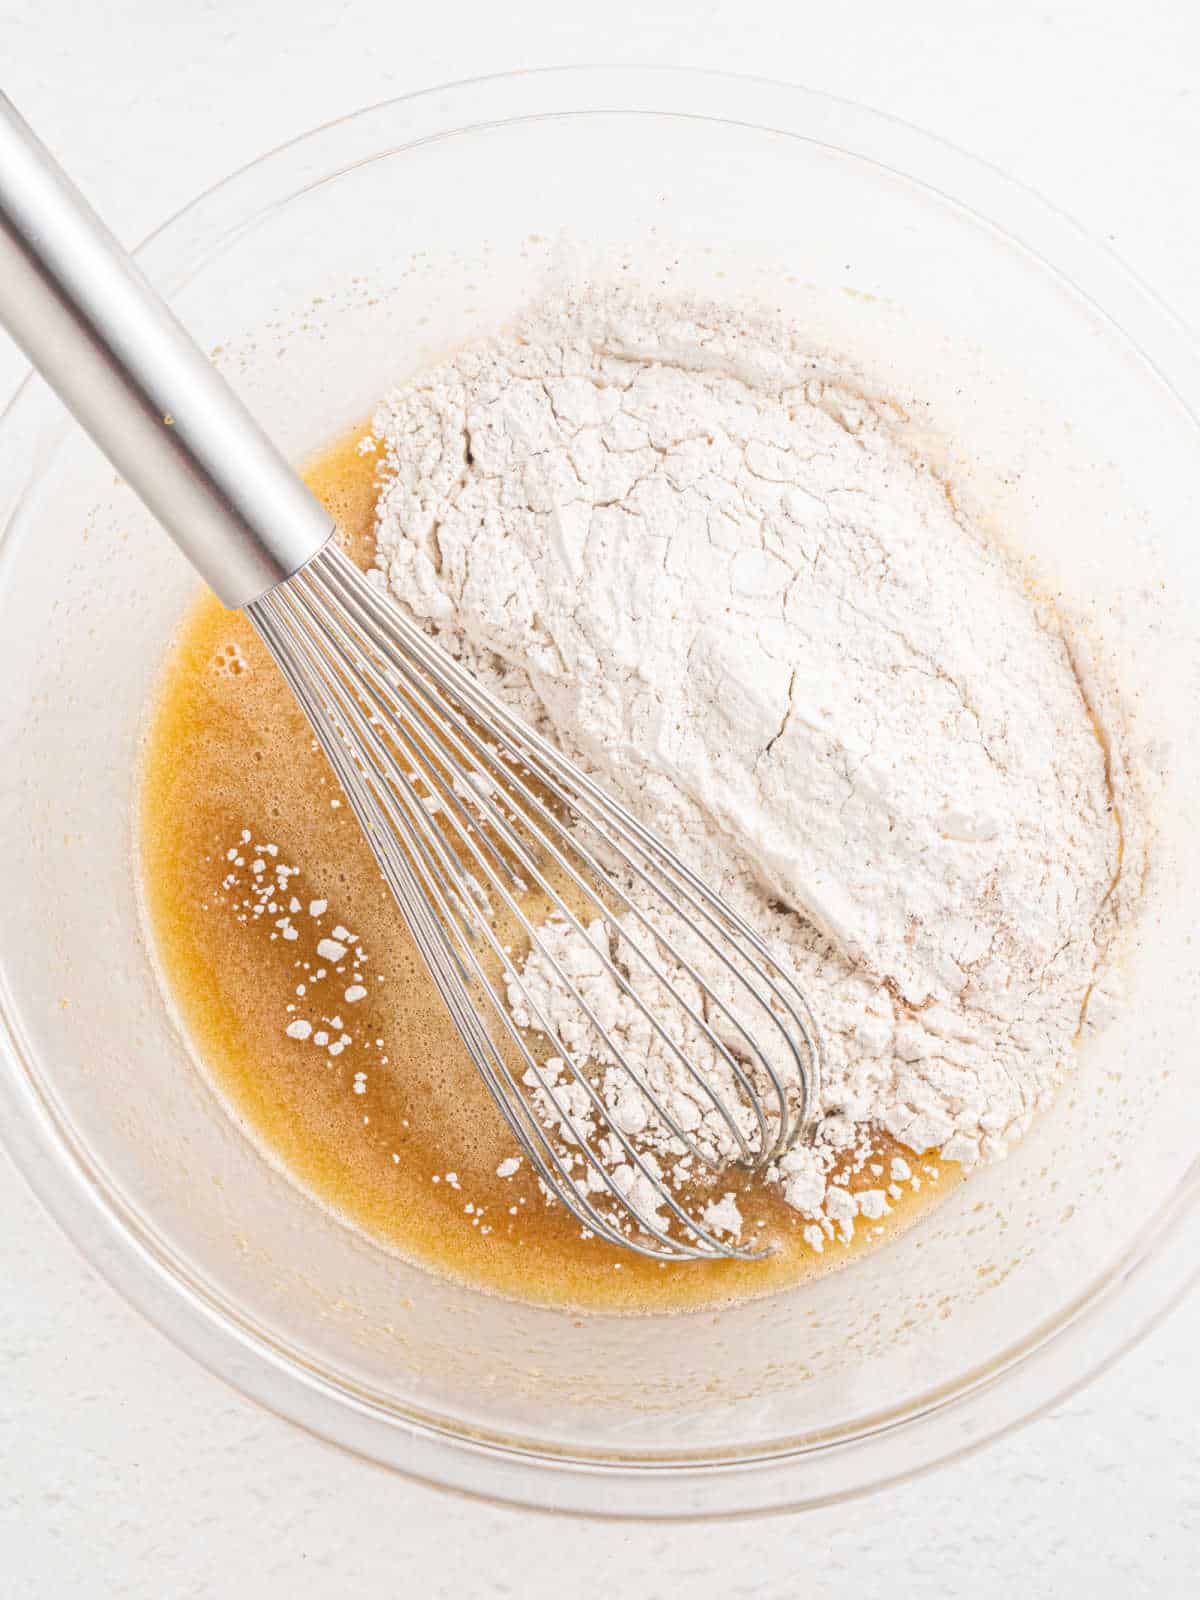 Flour added to cake batter in a white bowl with a whisk inside. White surface.